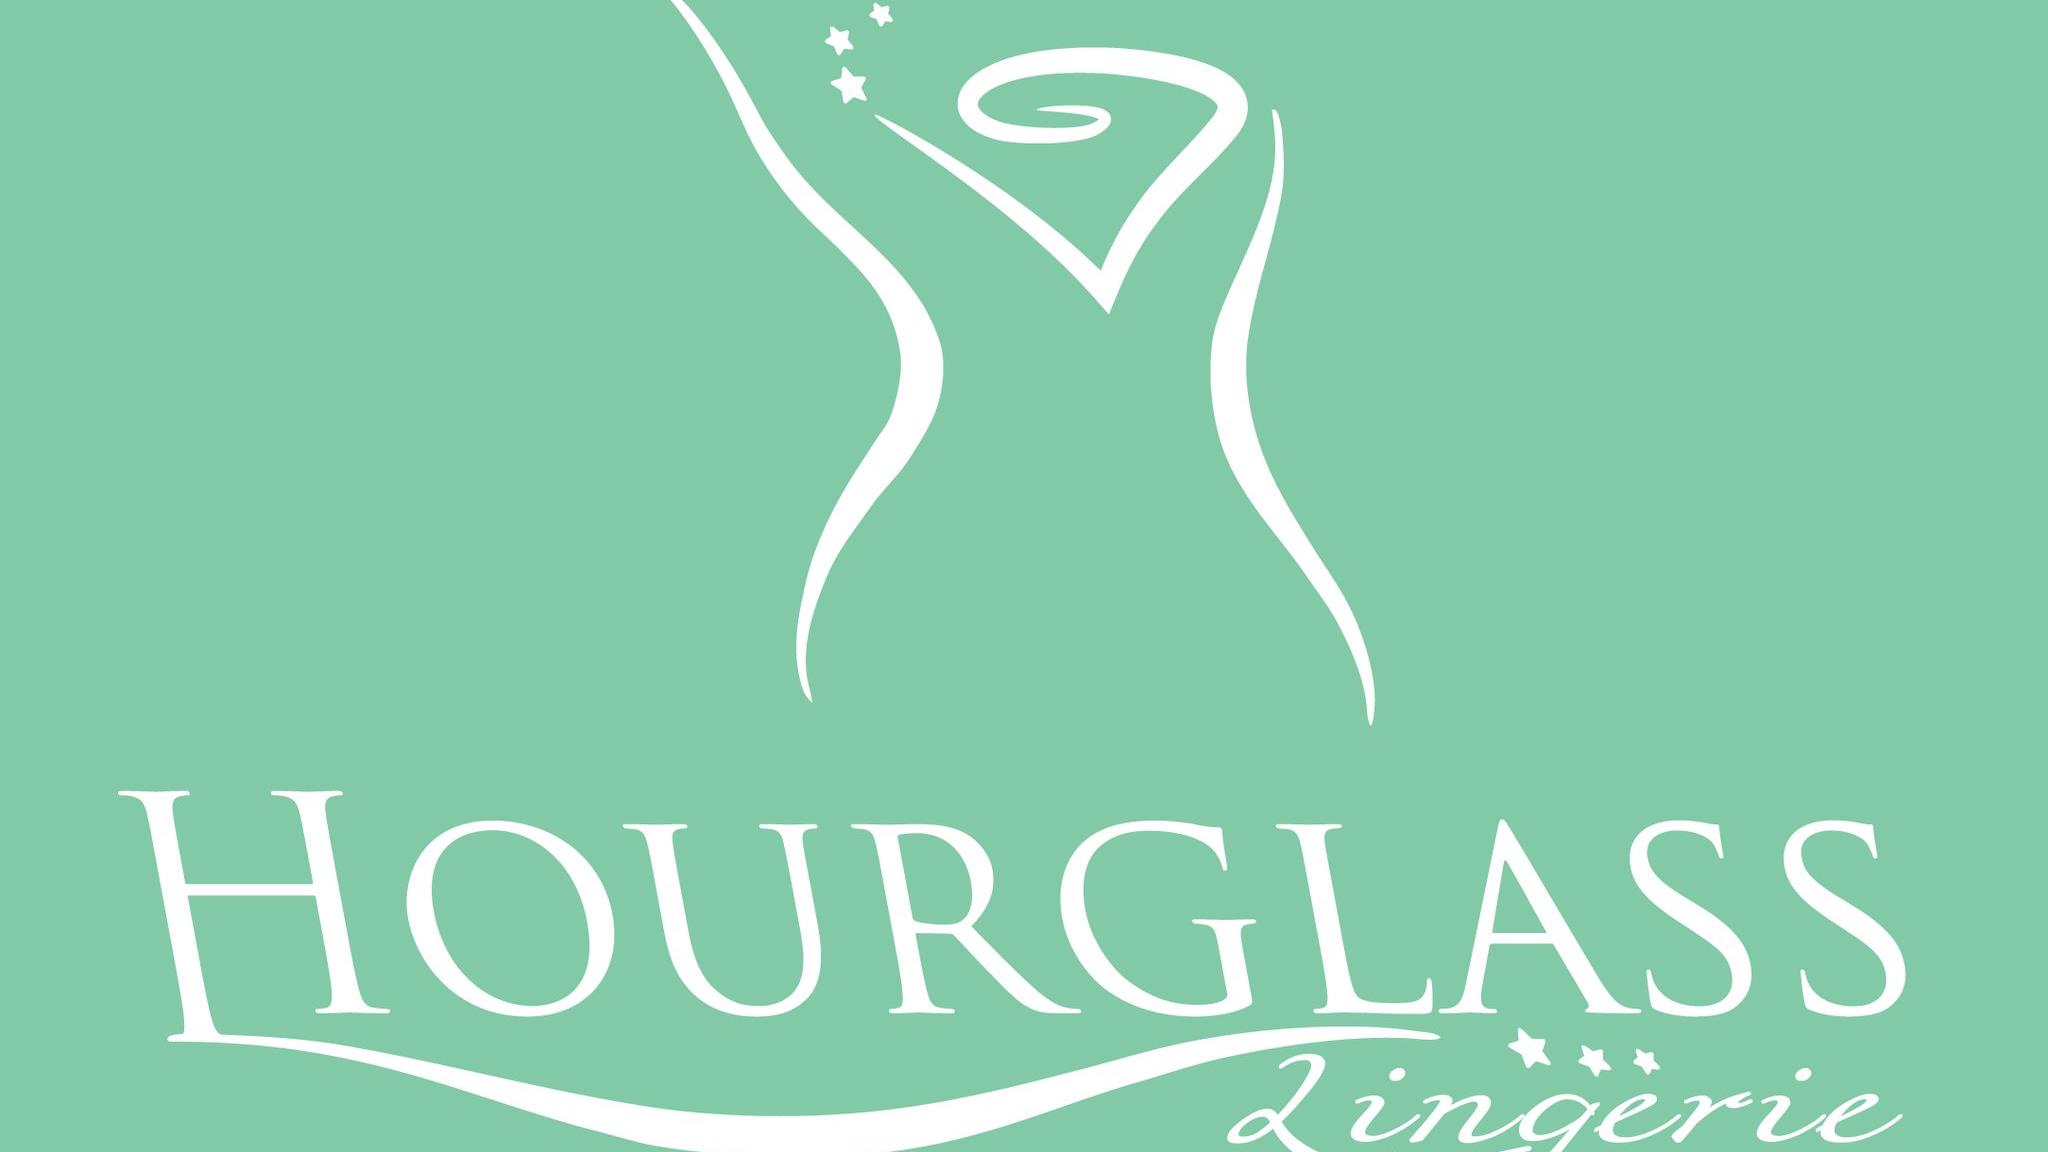 Hourglass Lingerie/Clothing                                                                                                                                                                                                